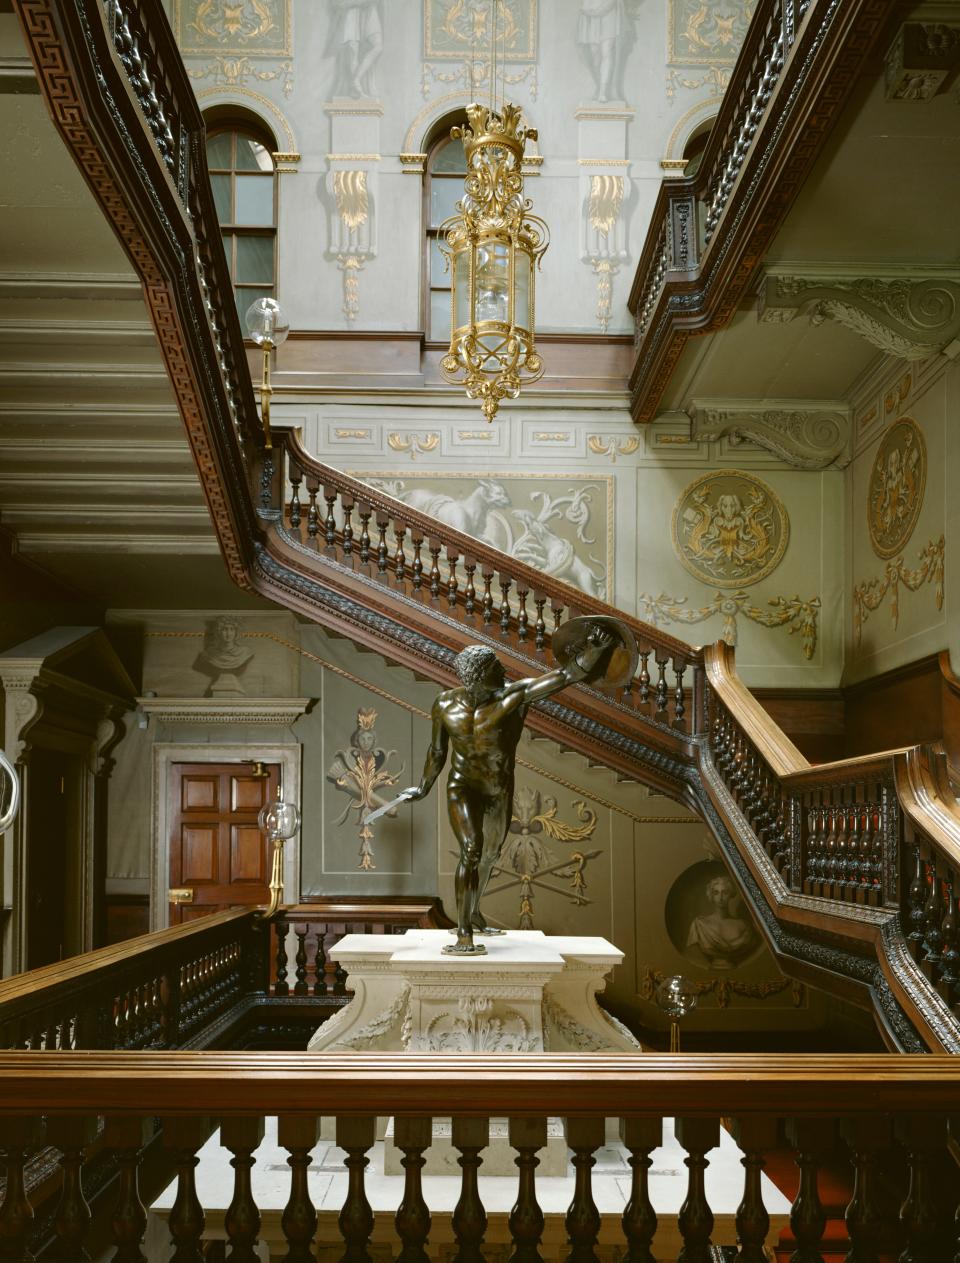 The Grand Staircase at Houghton Hall.